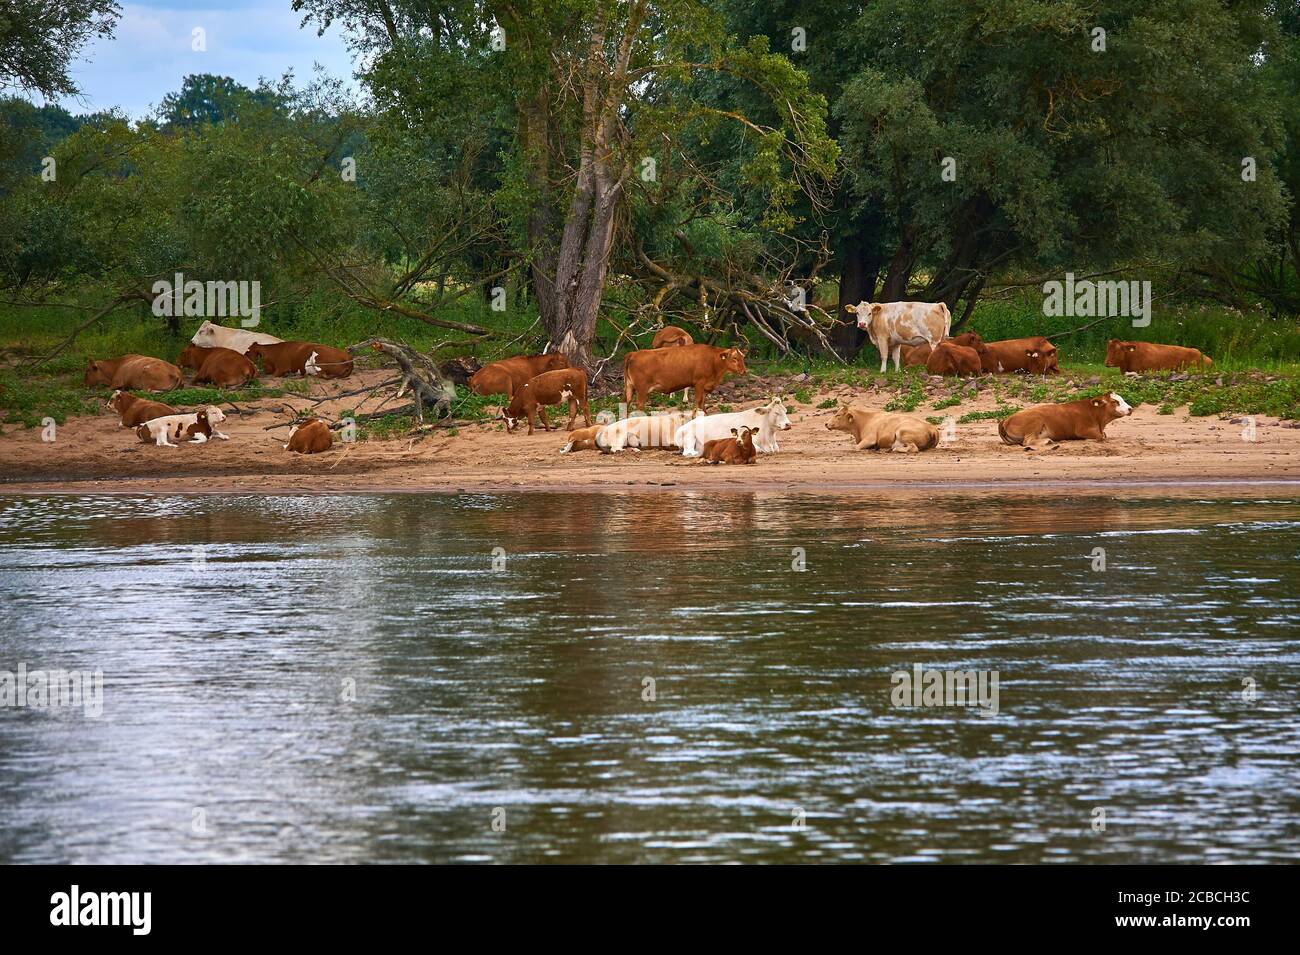 An outside living herd of cattle at the banks of river Elbe, Northern Germany Stock Photo